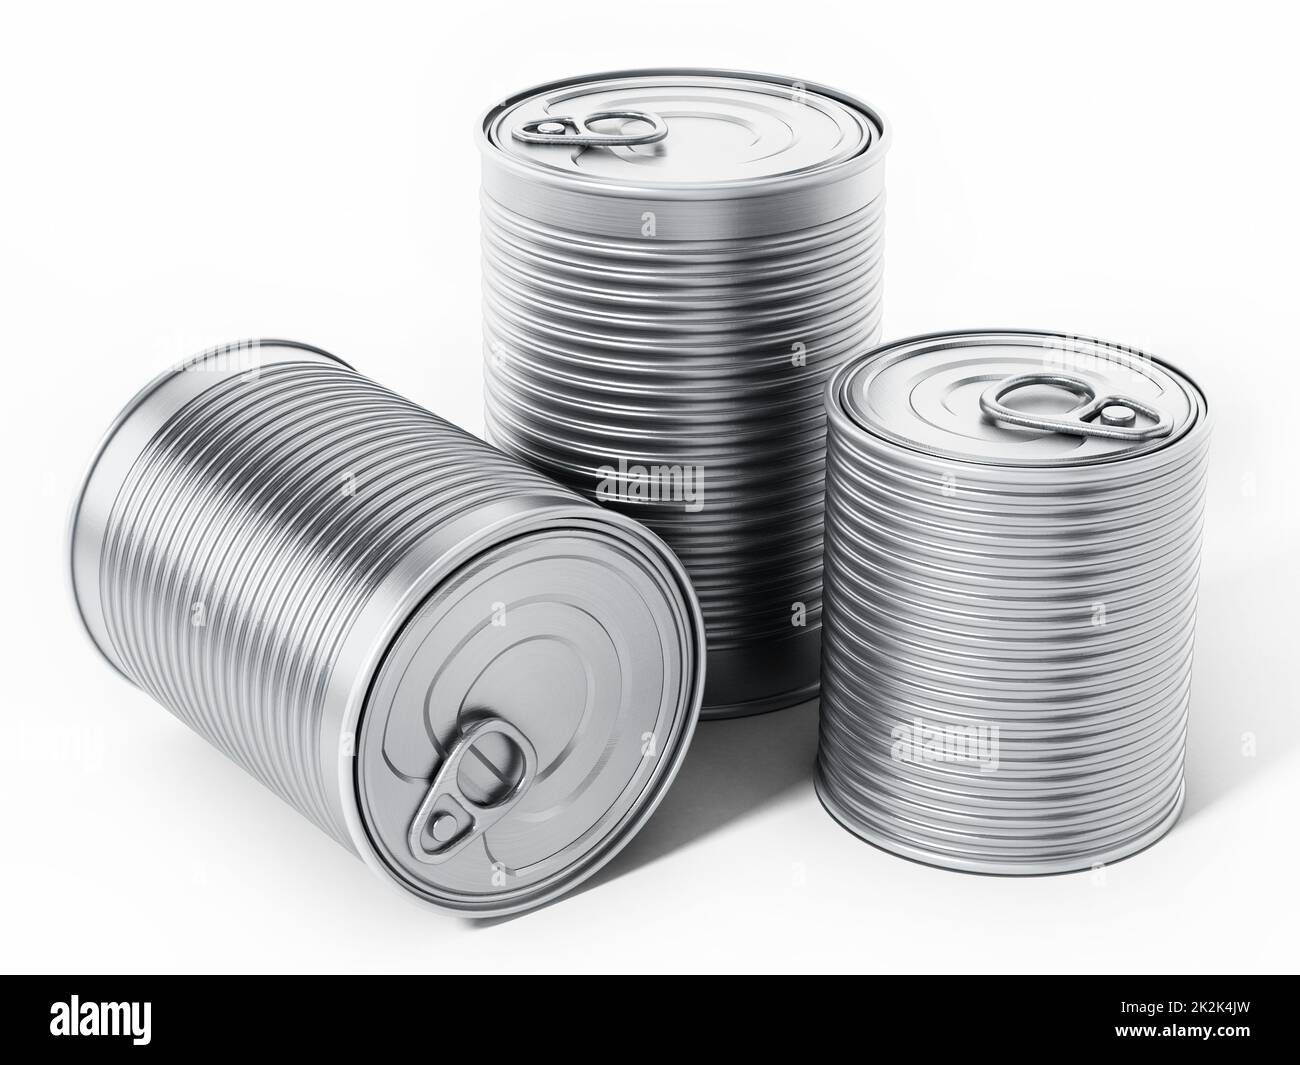 Tin cans isolated on white background. 3D illustration Stock Photo